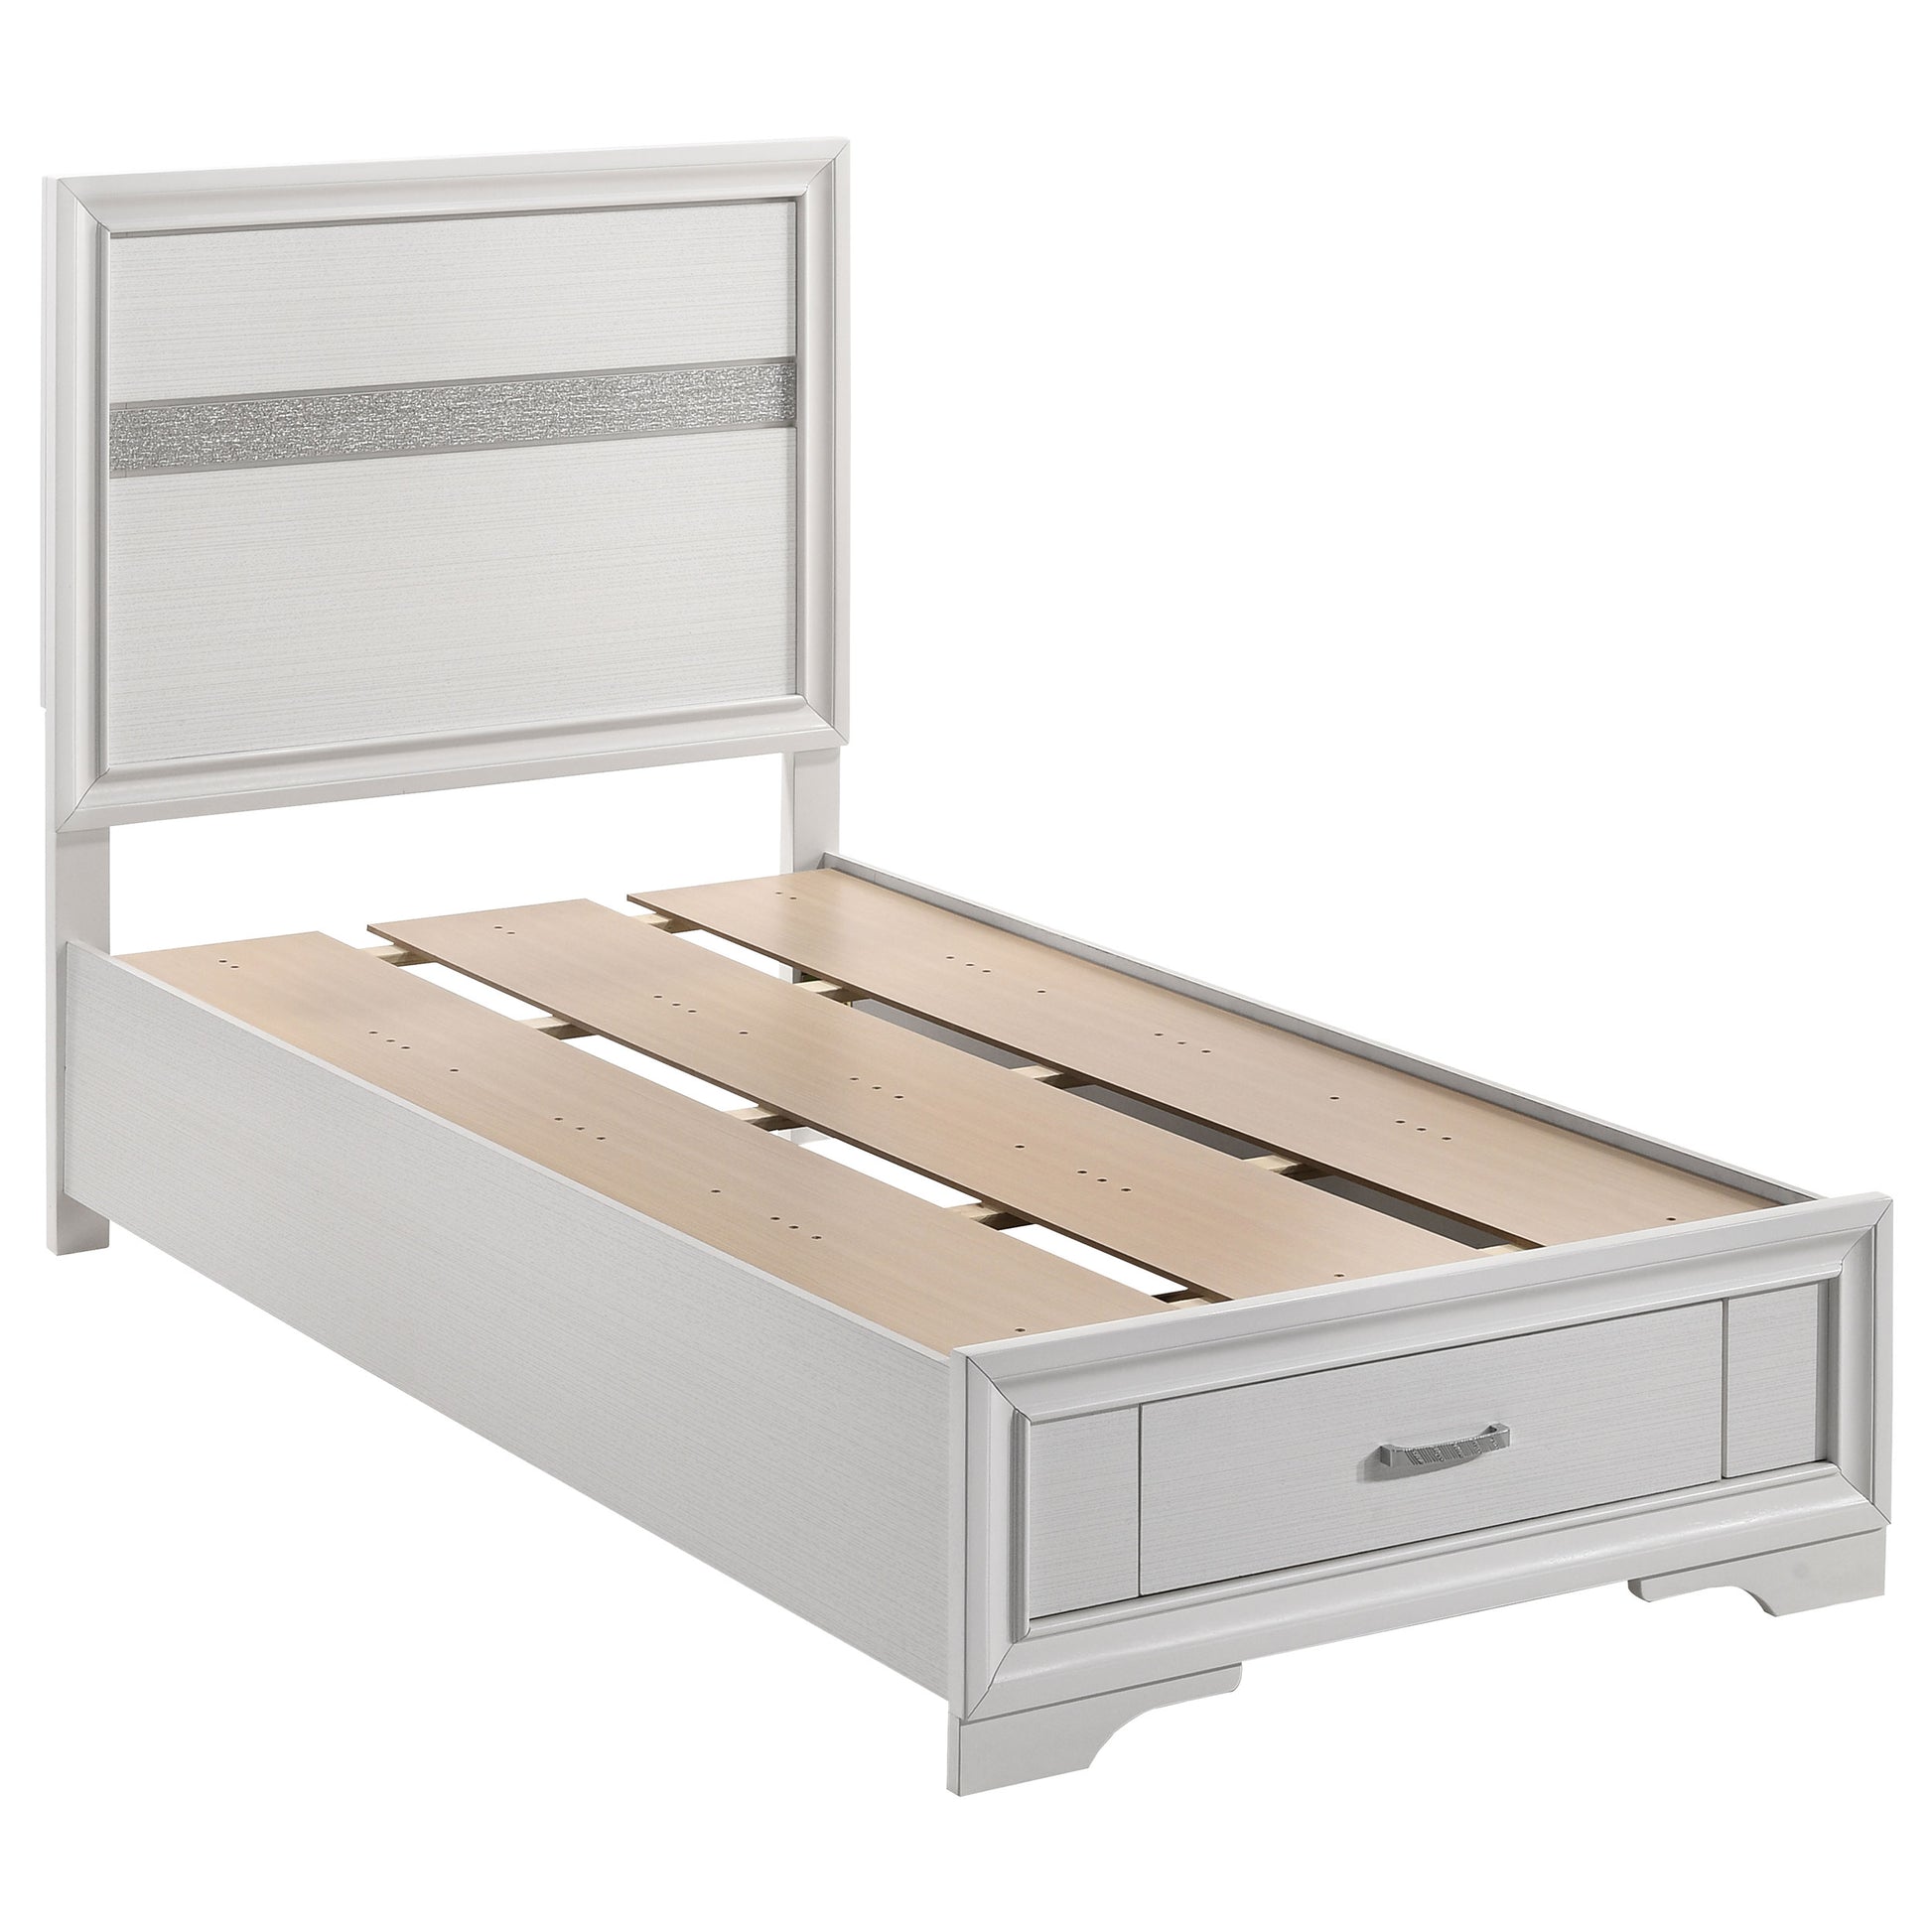 Twin Bed 4 Pc Set